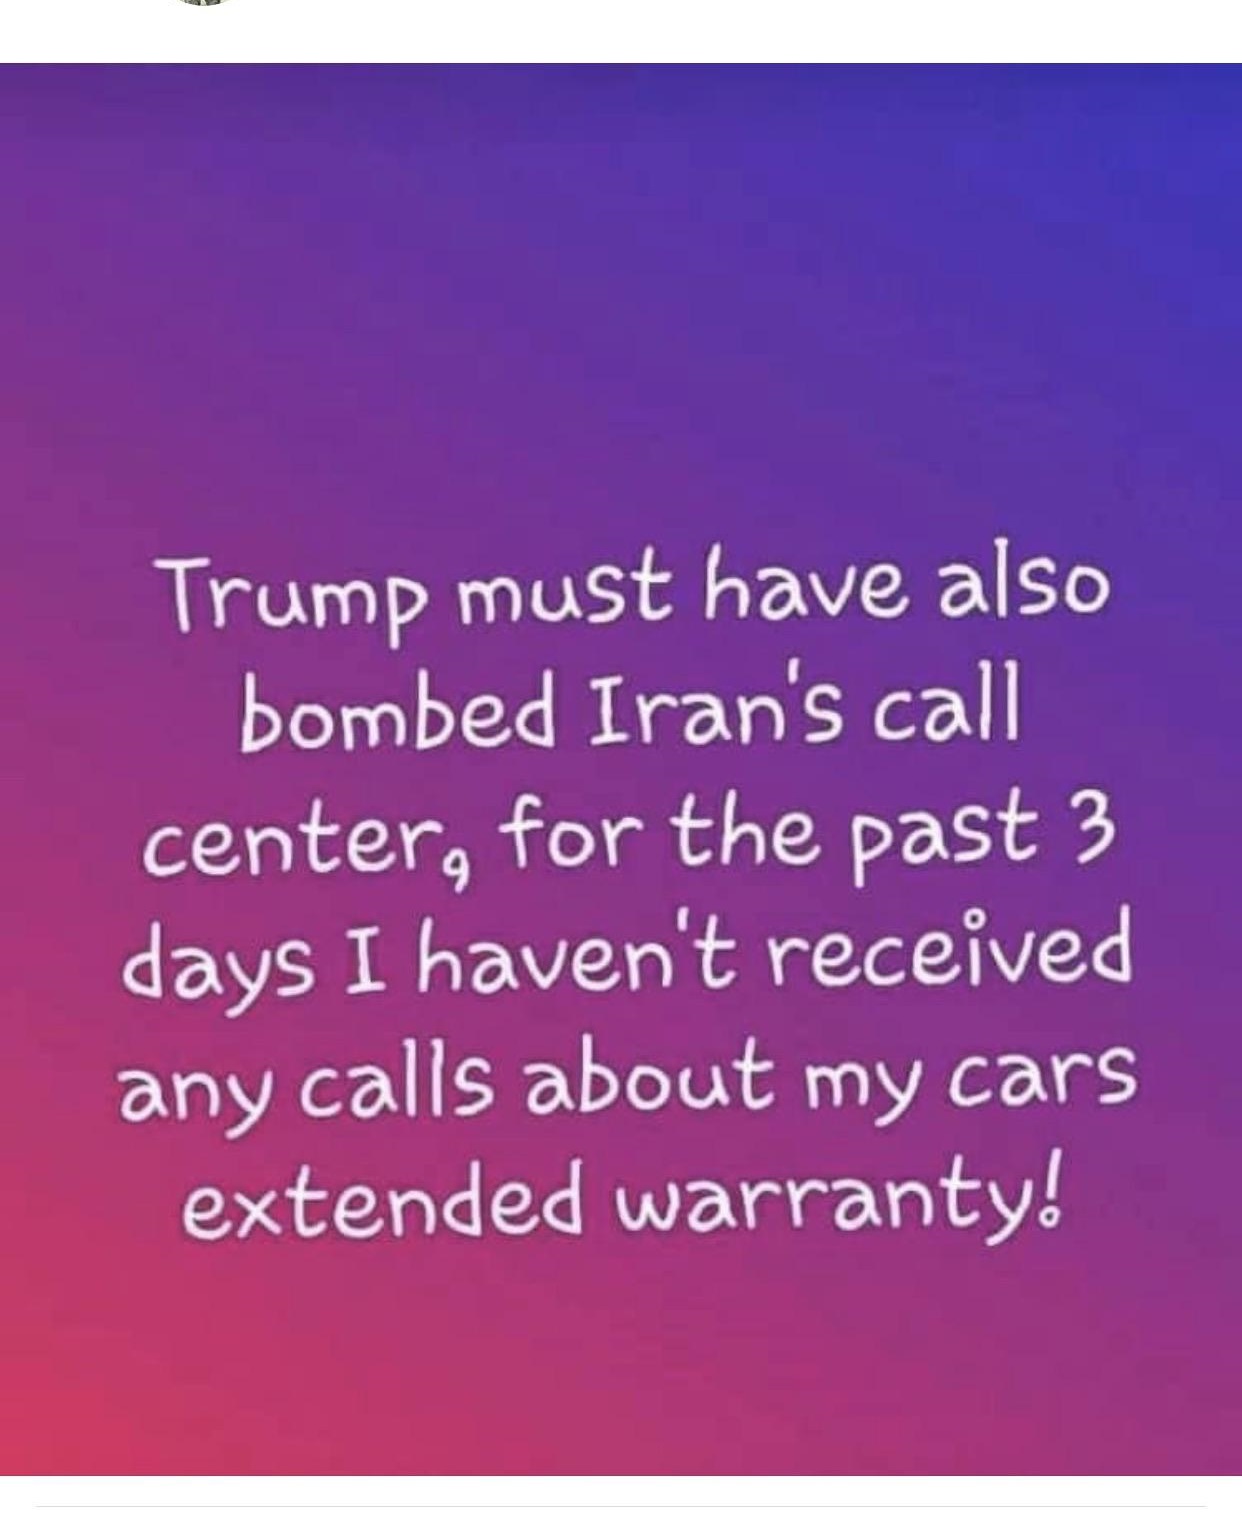 sky - Trump must have also bombed Iran's call center, for the past 3 days I haven't received any calls about my cars extended warranty!